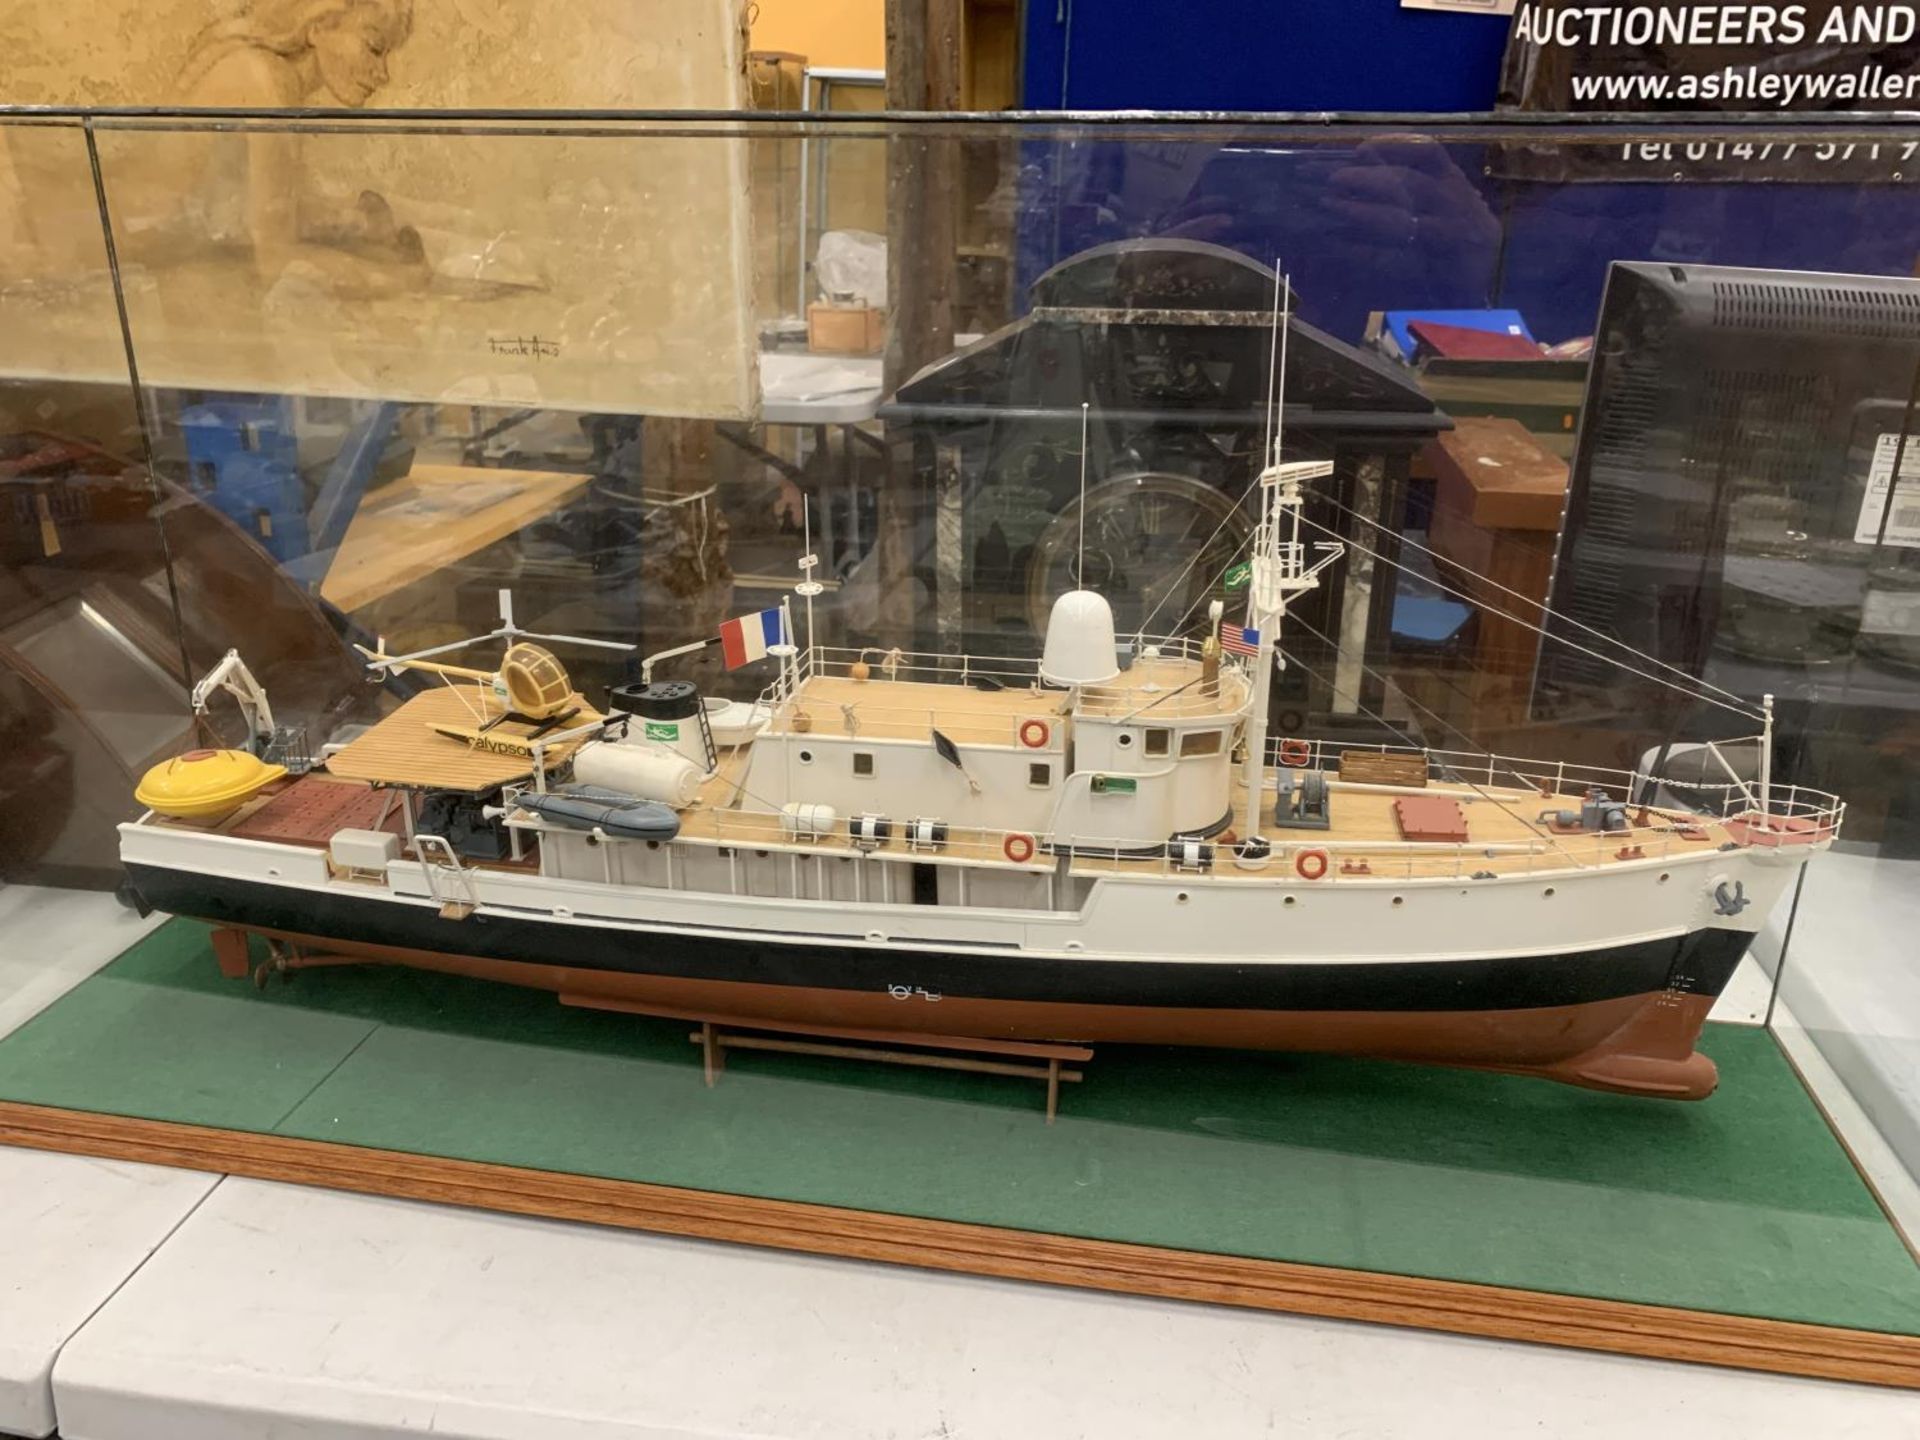 A LARGE MODEL OF A BOAT WITH HELICOPTER IN A GLASS CASE - Bild 2 aus 5